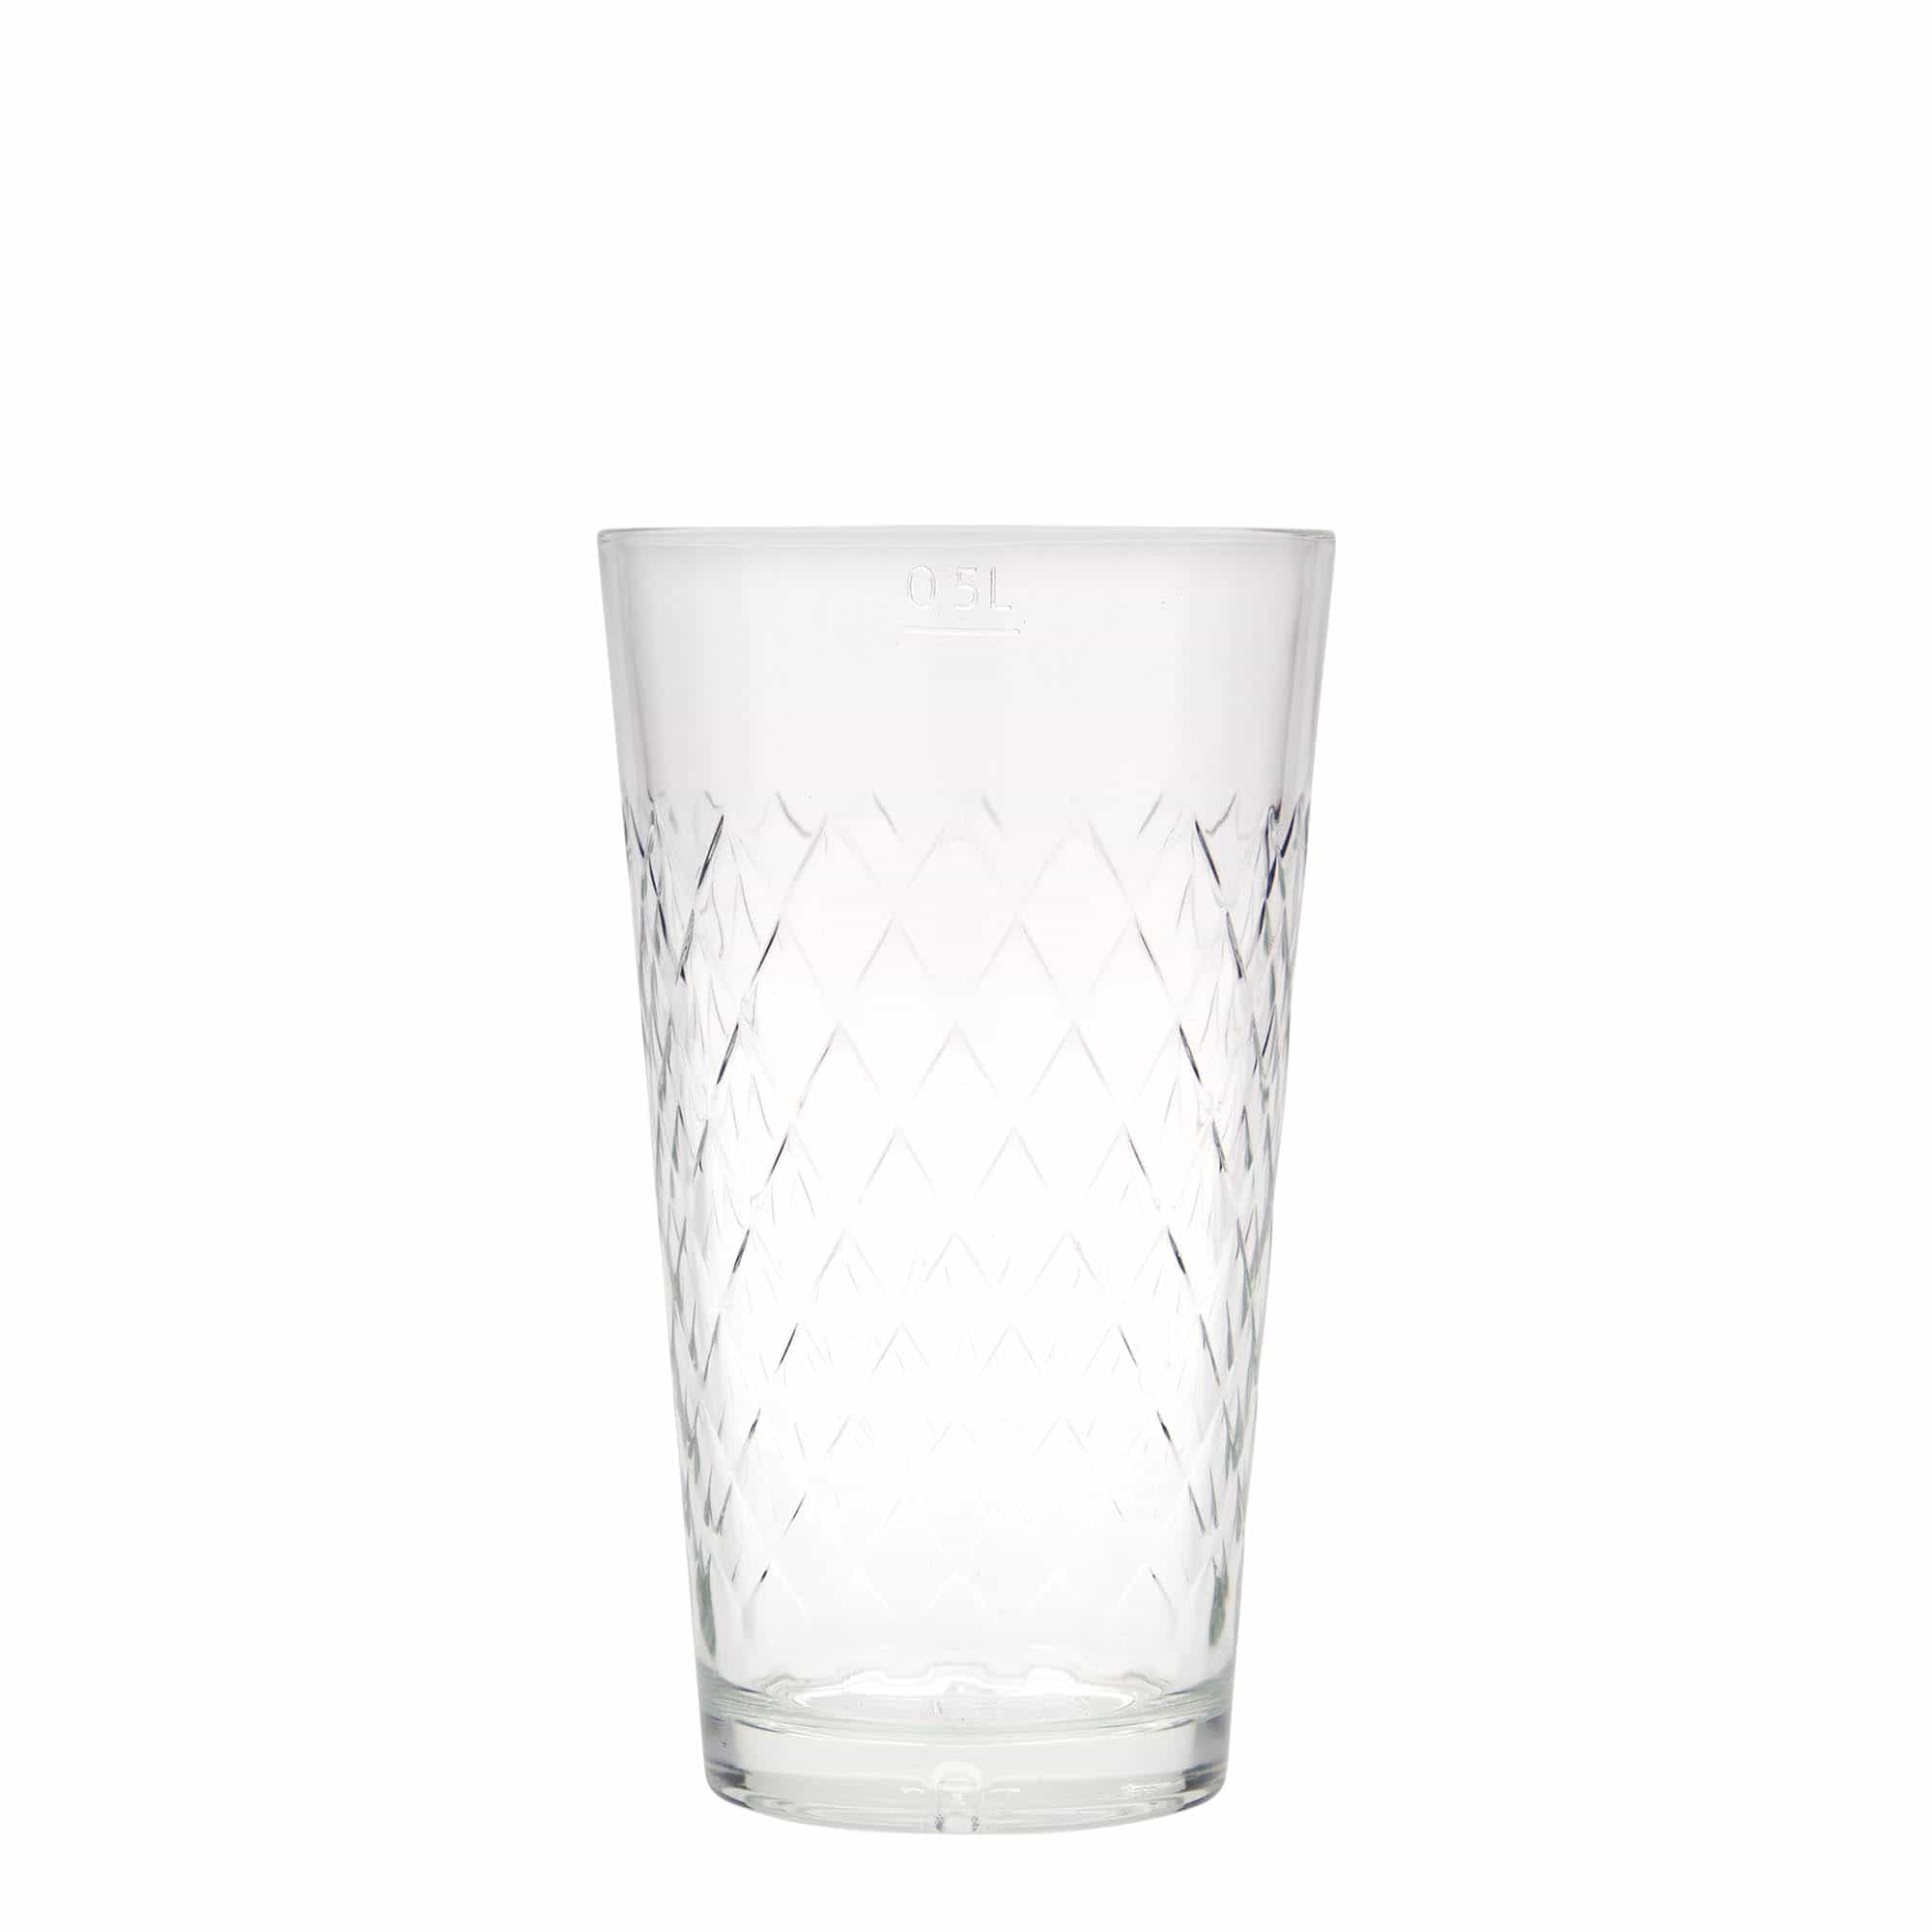 500 ml drinking glass for apple wine